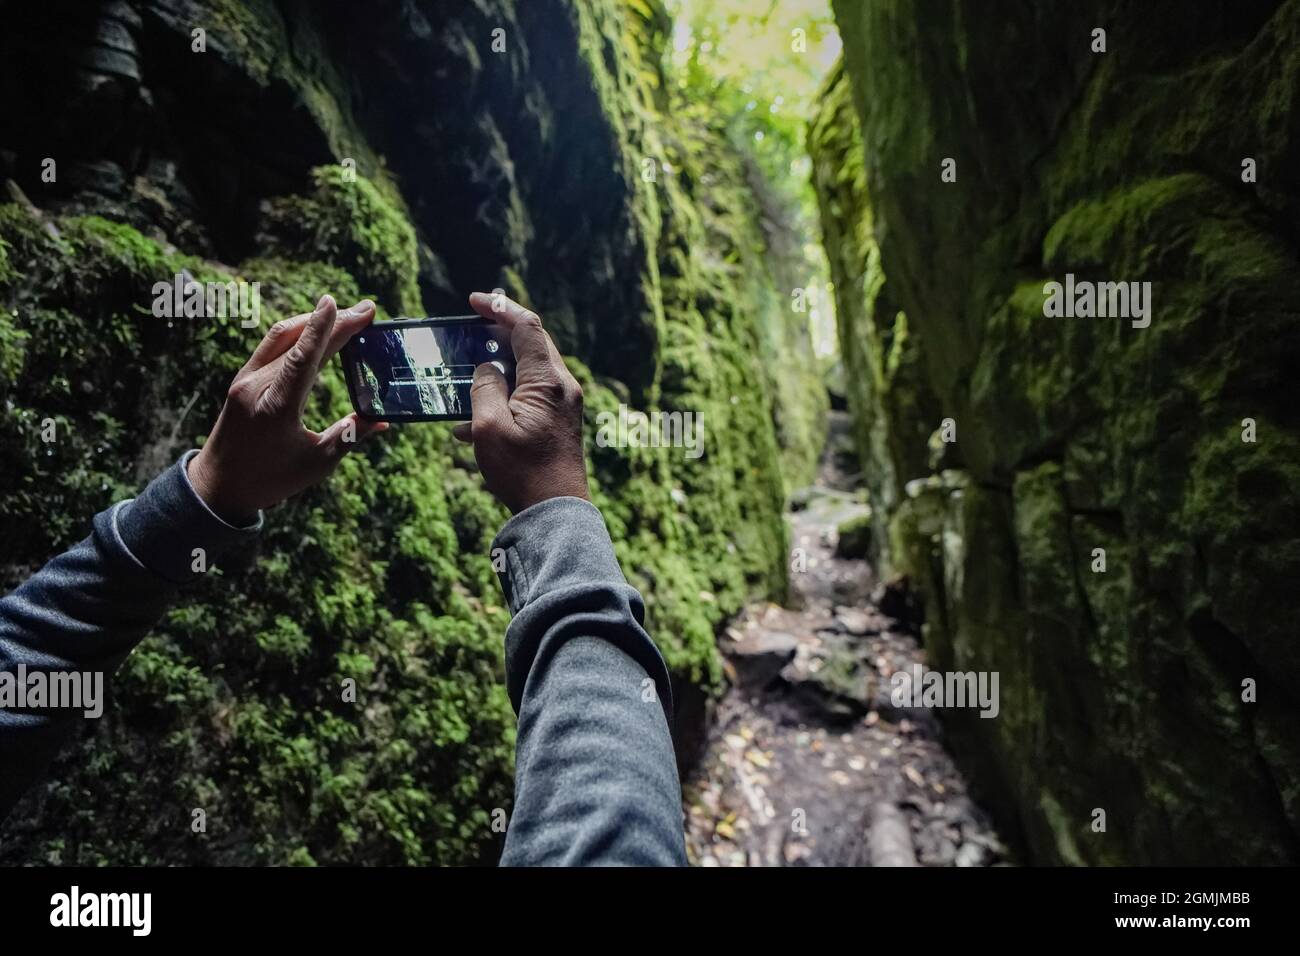 Taking picture using cell phone at an outdoor hike trail Stock Photo